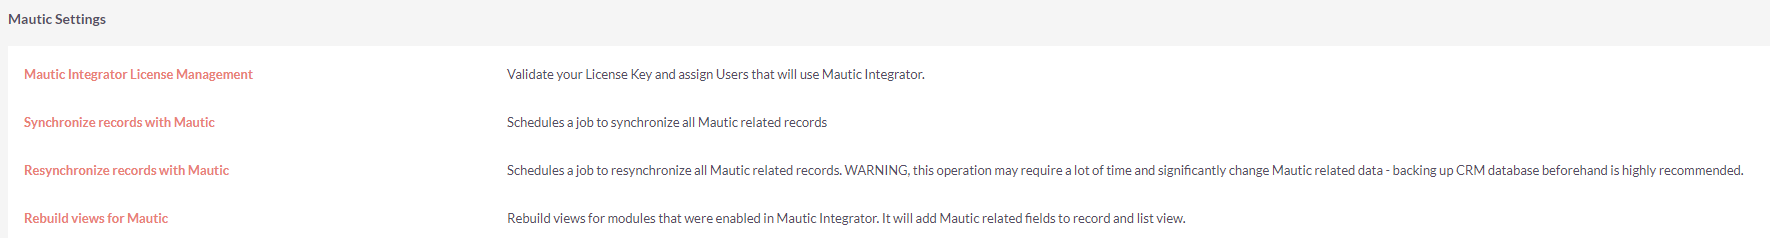 Resynchronize records with Mautic.png